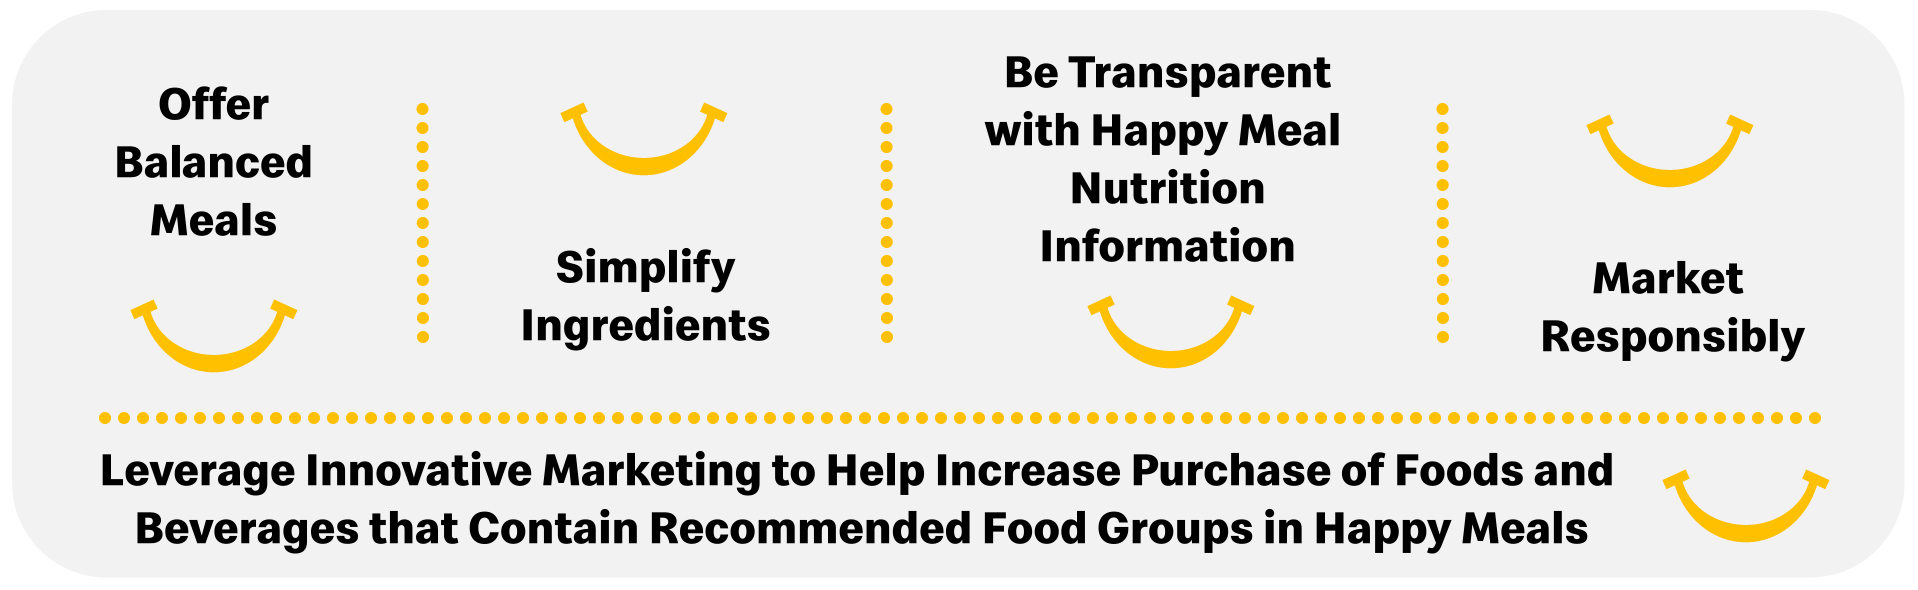 1. Offer balanced meals. 2. Simplify ingredients. 3. Be transparent with Happy Meal nutrition information. 4. Market responsibly. 5. Leverage innovative marketing to help increase purchase of foods and beverages that contain recommended food groups in Happy Meals.